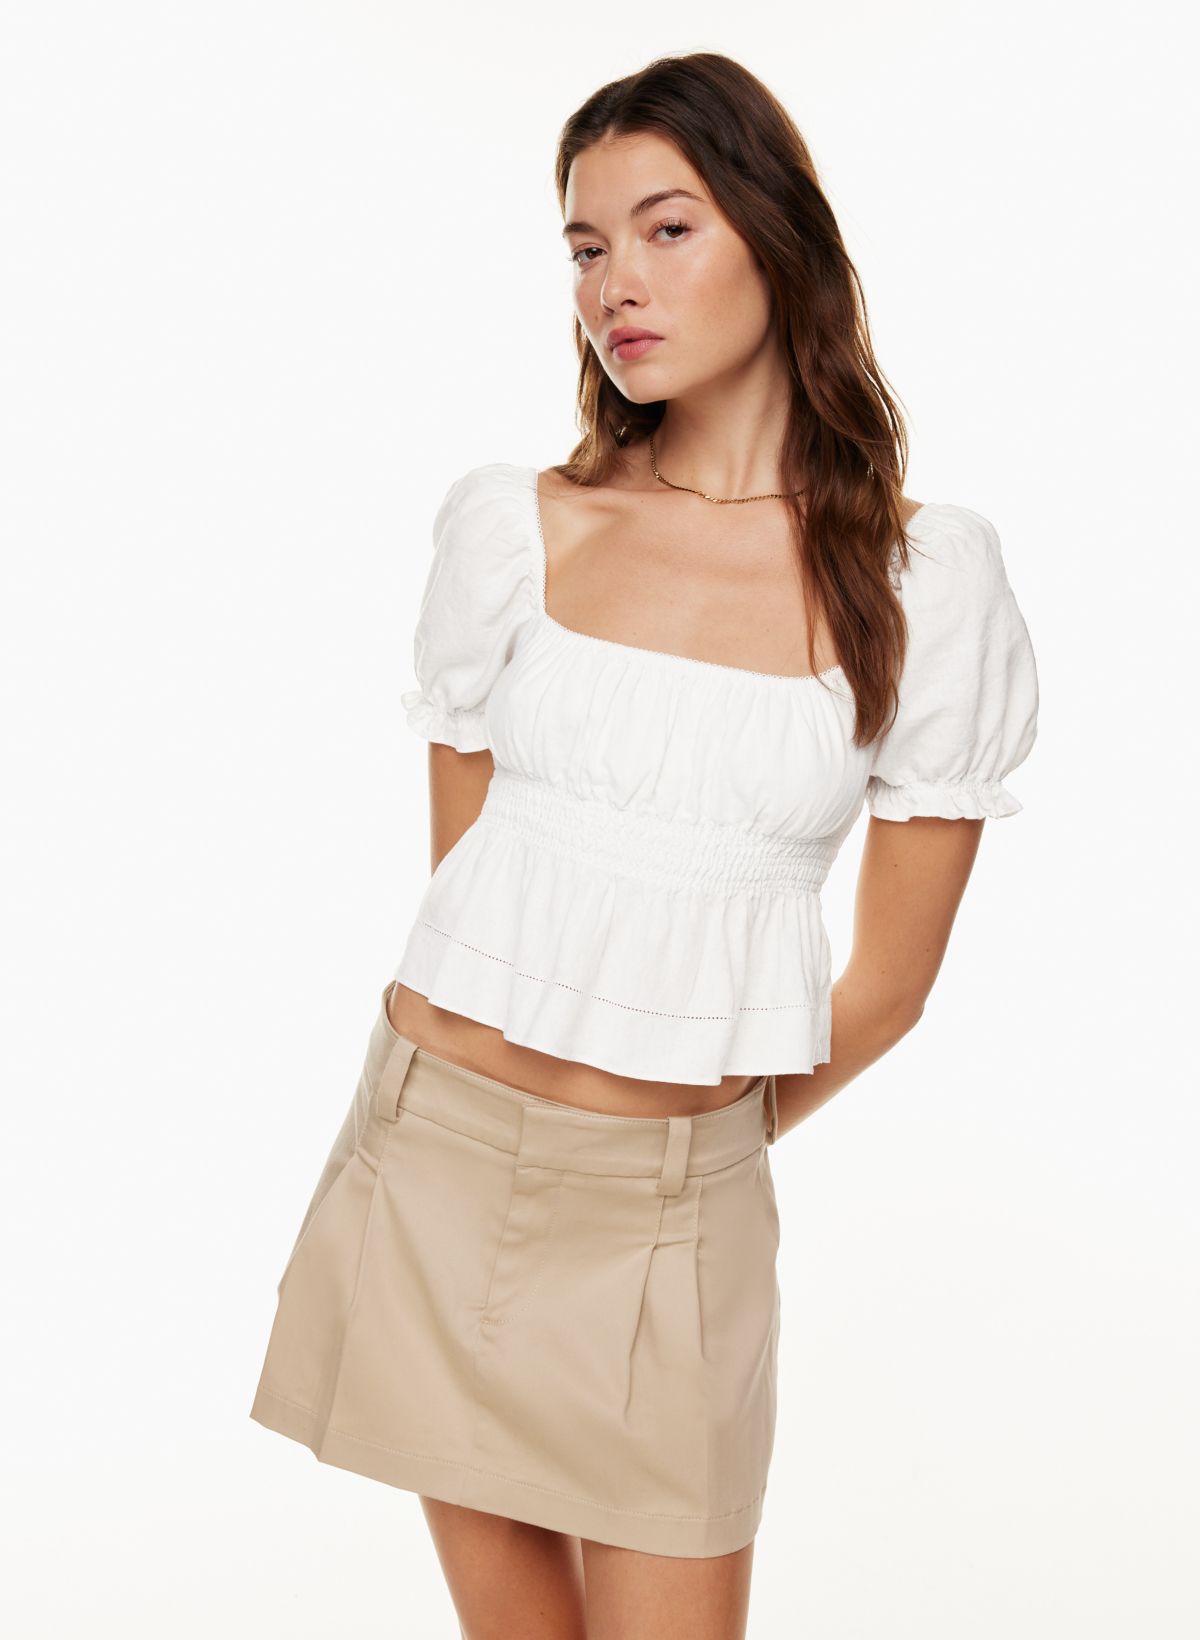 image of a female model with long brown hair wearing a peasant-style white top with a low, straight neckline and slightly puffy short sleeves. The top flares out slightly in the bottom. She pairs the shirt with a khaki-coloured mini skirt.